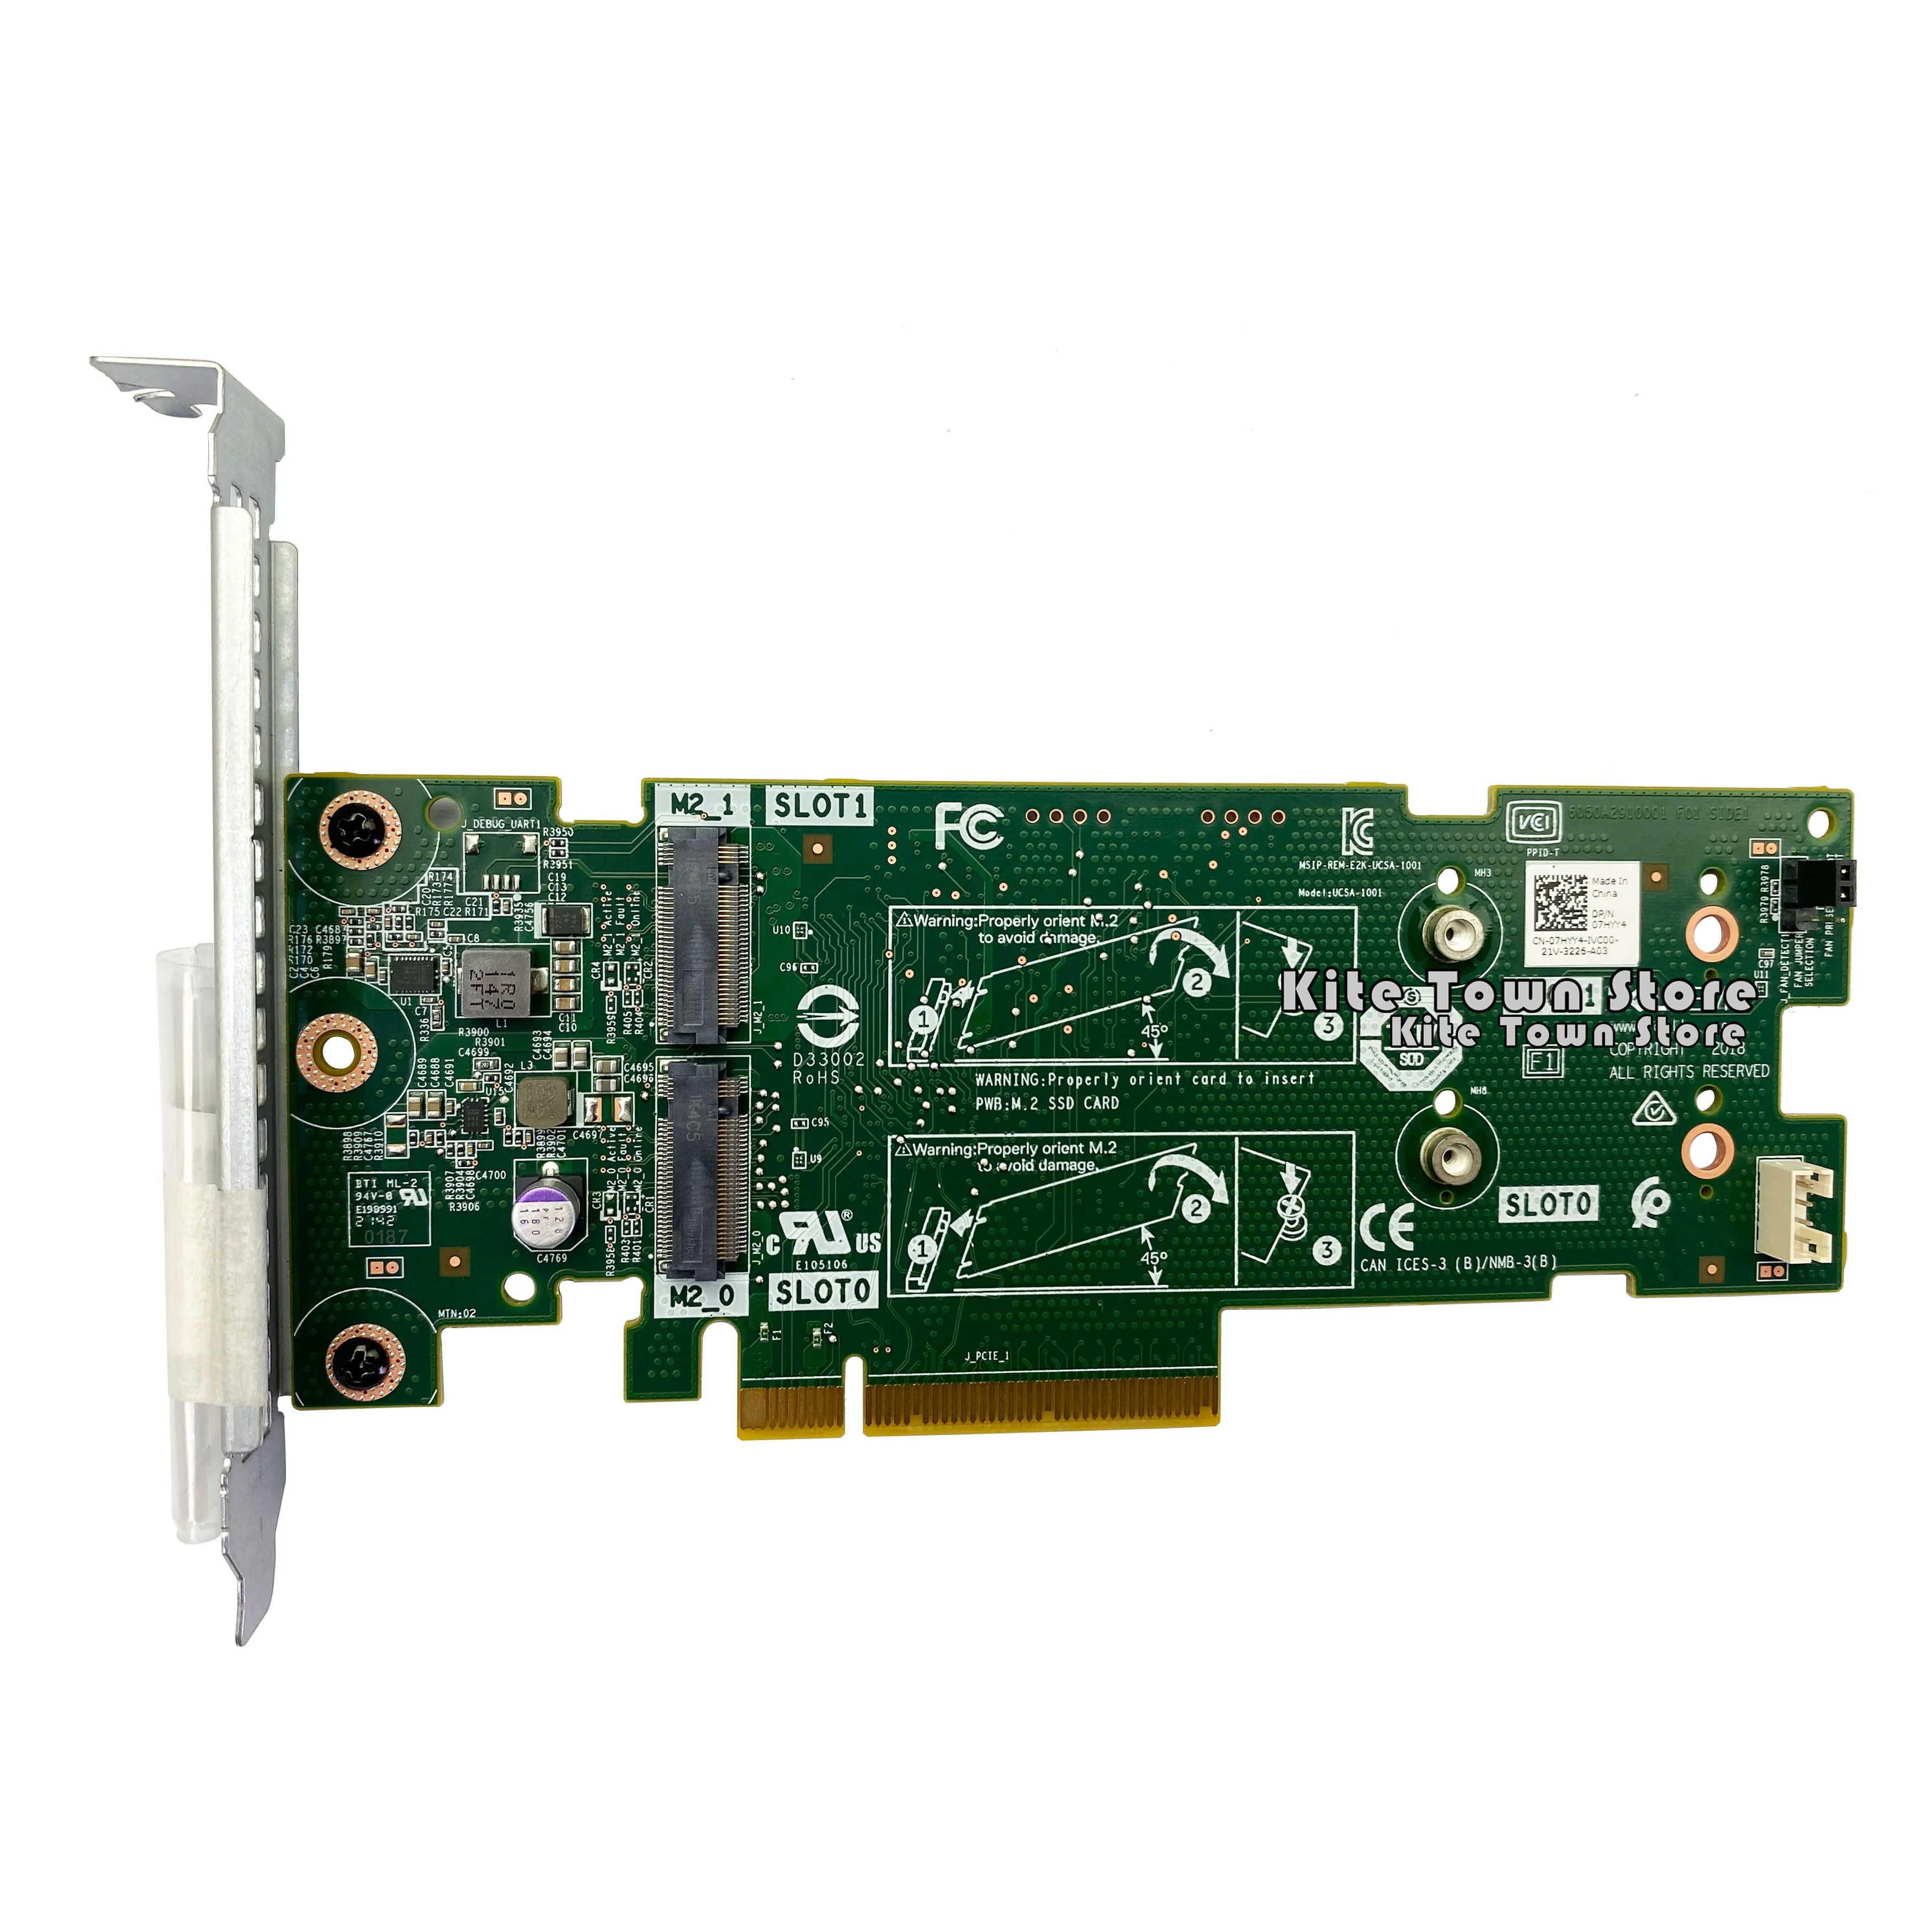 PCIE to M.2 BOSS Card for Dell PowerEdge G14 G15 Server Boot Optimized Storage with Long Bracket